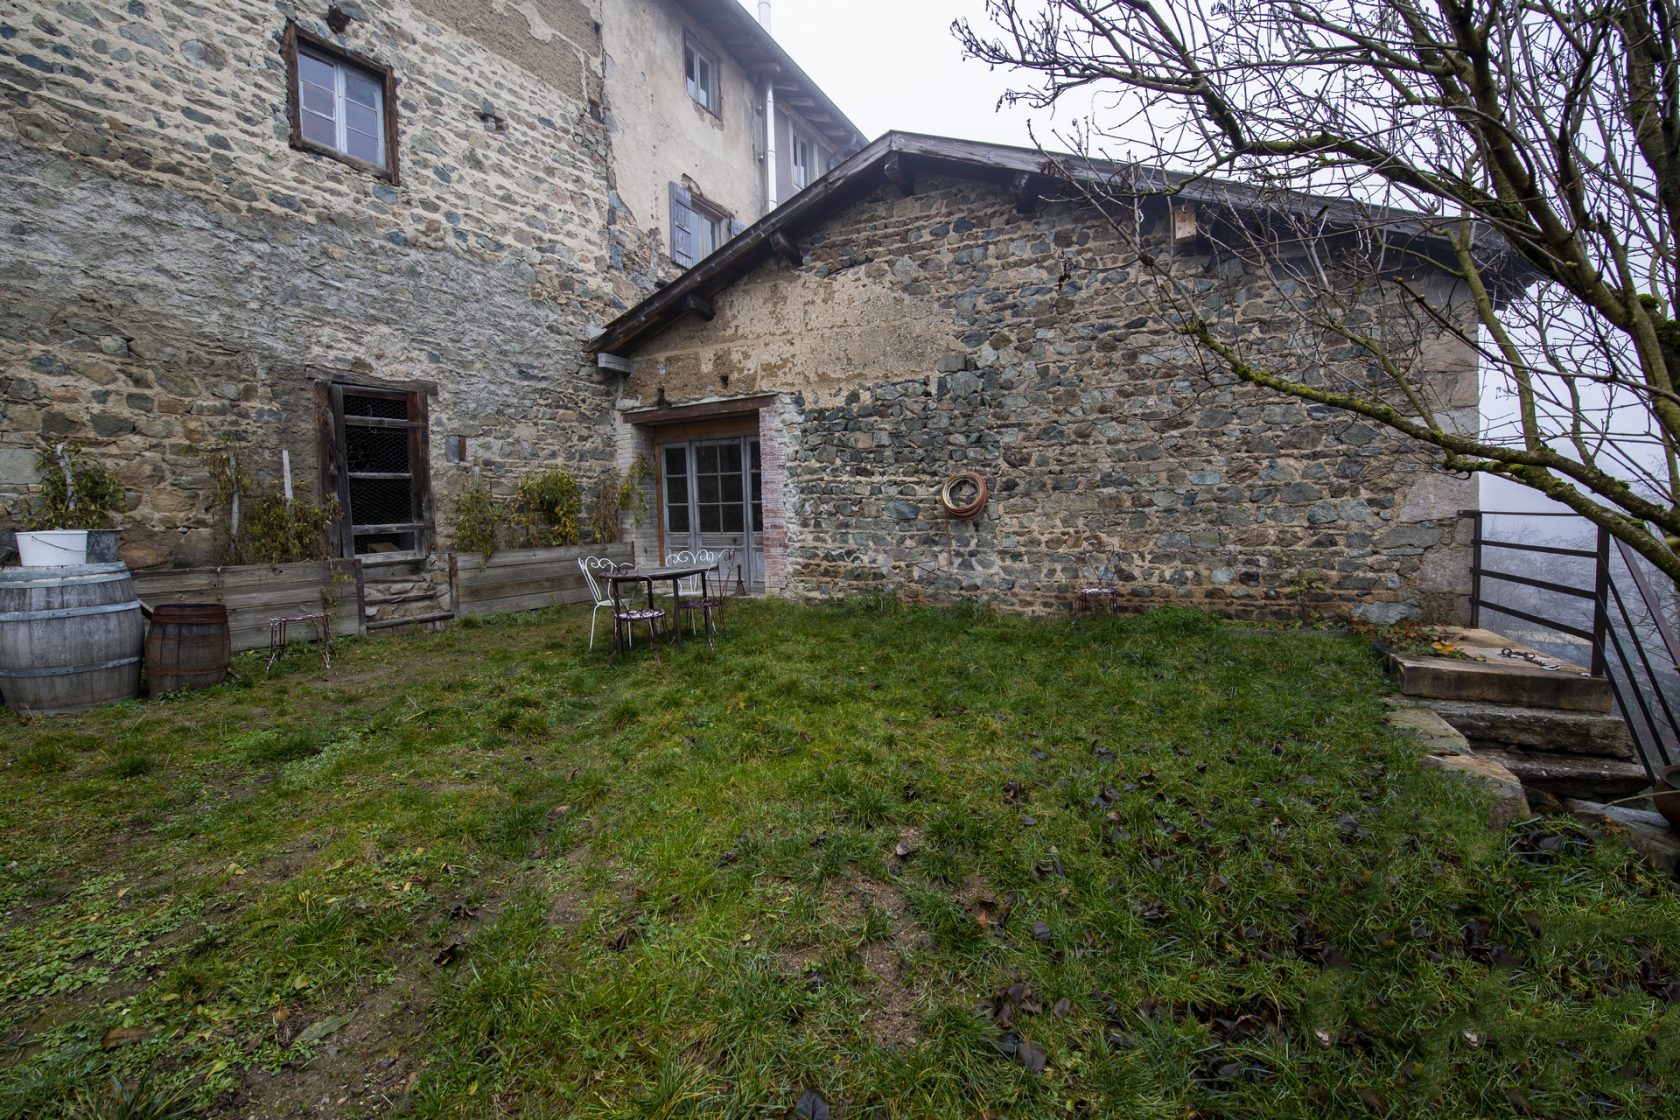 Stone house in a bucolic setting